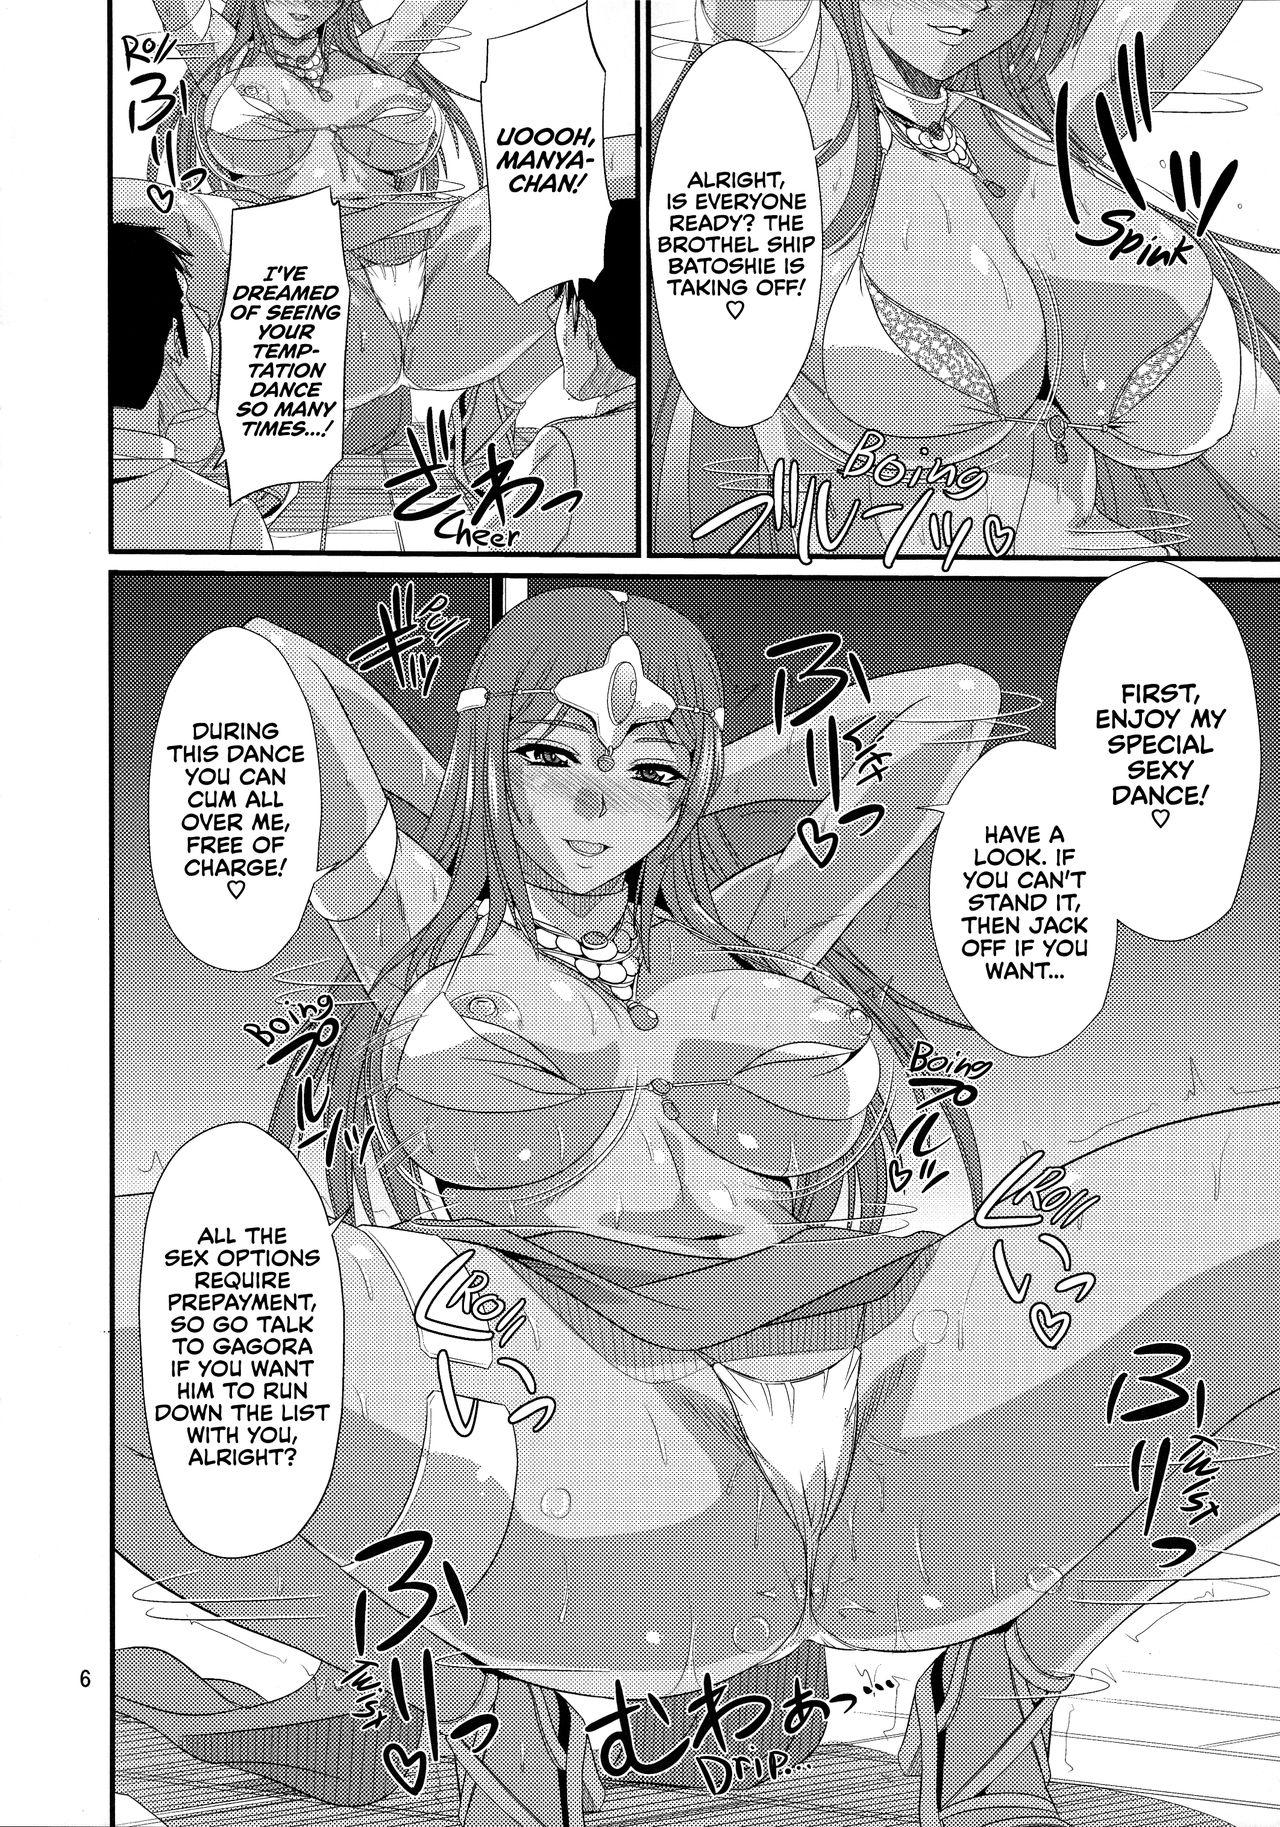 Mommy Odoriko Shoukan Batoshie | The Showgirl Brothel Airship Batoshie - Dragon quest iv Dragon quest viii Dragon quest heroes Oral Sex - Page 5